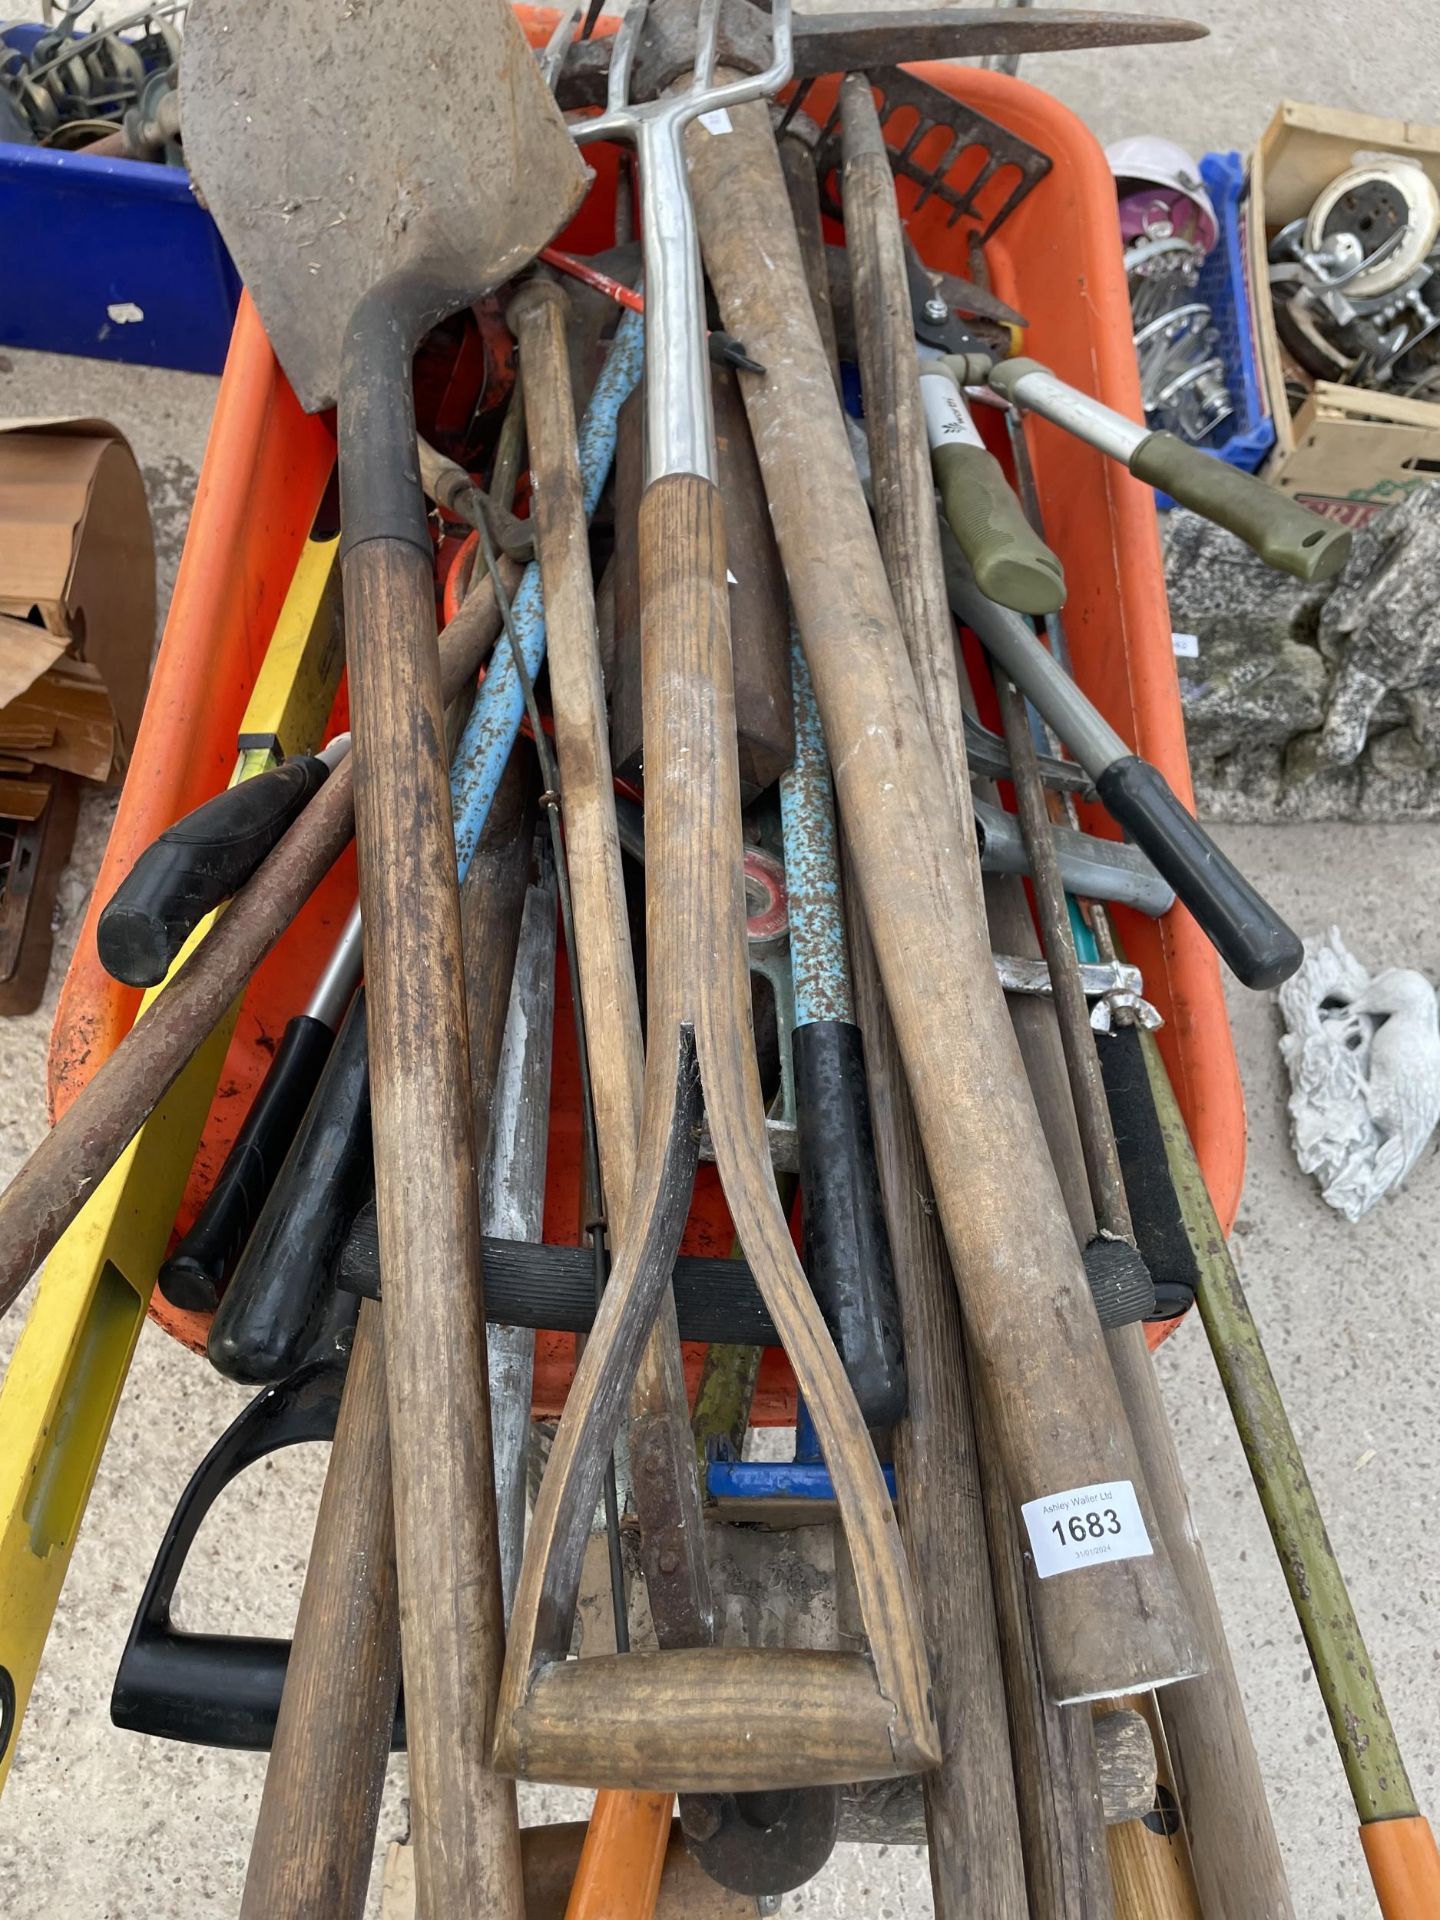 AN ORANGE PLASTIC WHEEL BARROW WITH A LARGE ASSORTMENT OF GARDEN TOOLS TO INCLUDE SPADES, FORKS - Image 4 of 4